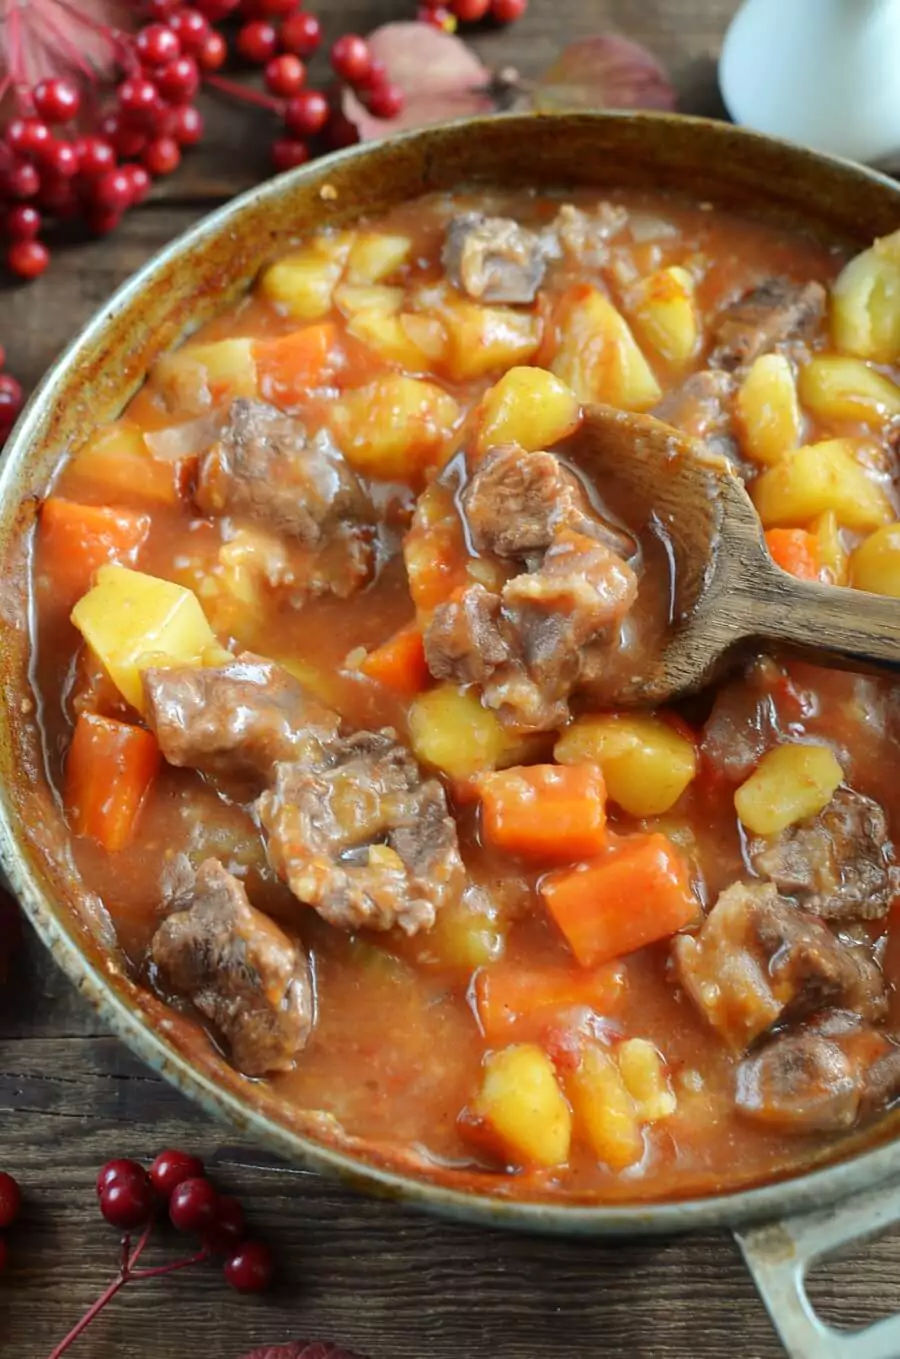 Hearty Baked Beef Stew Recipe - Cook.me Recipes